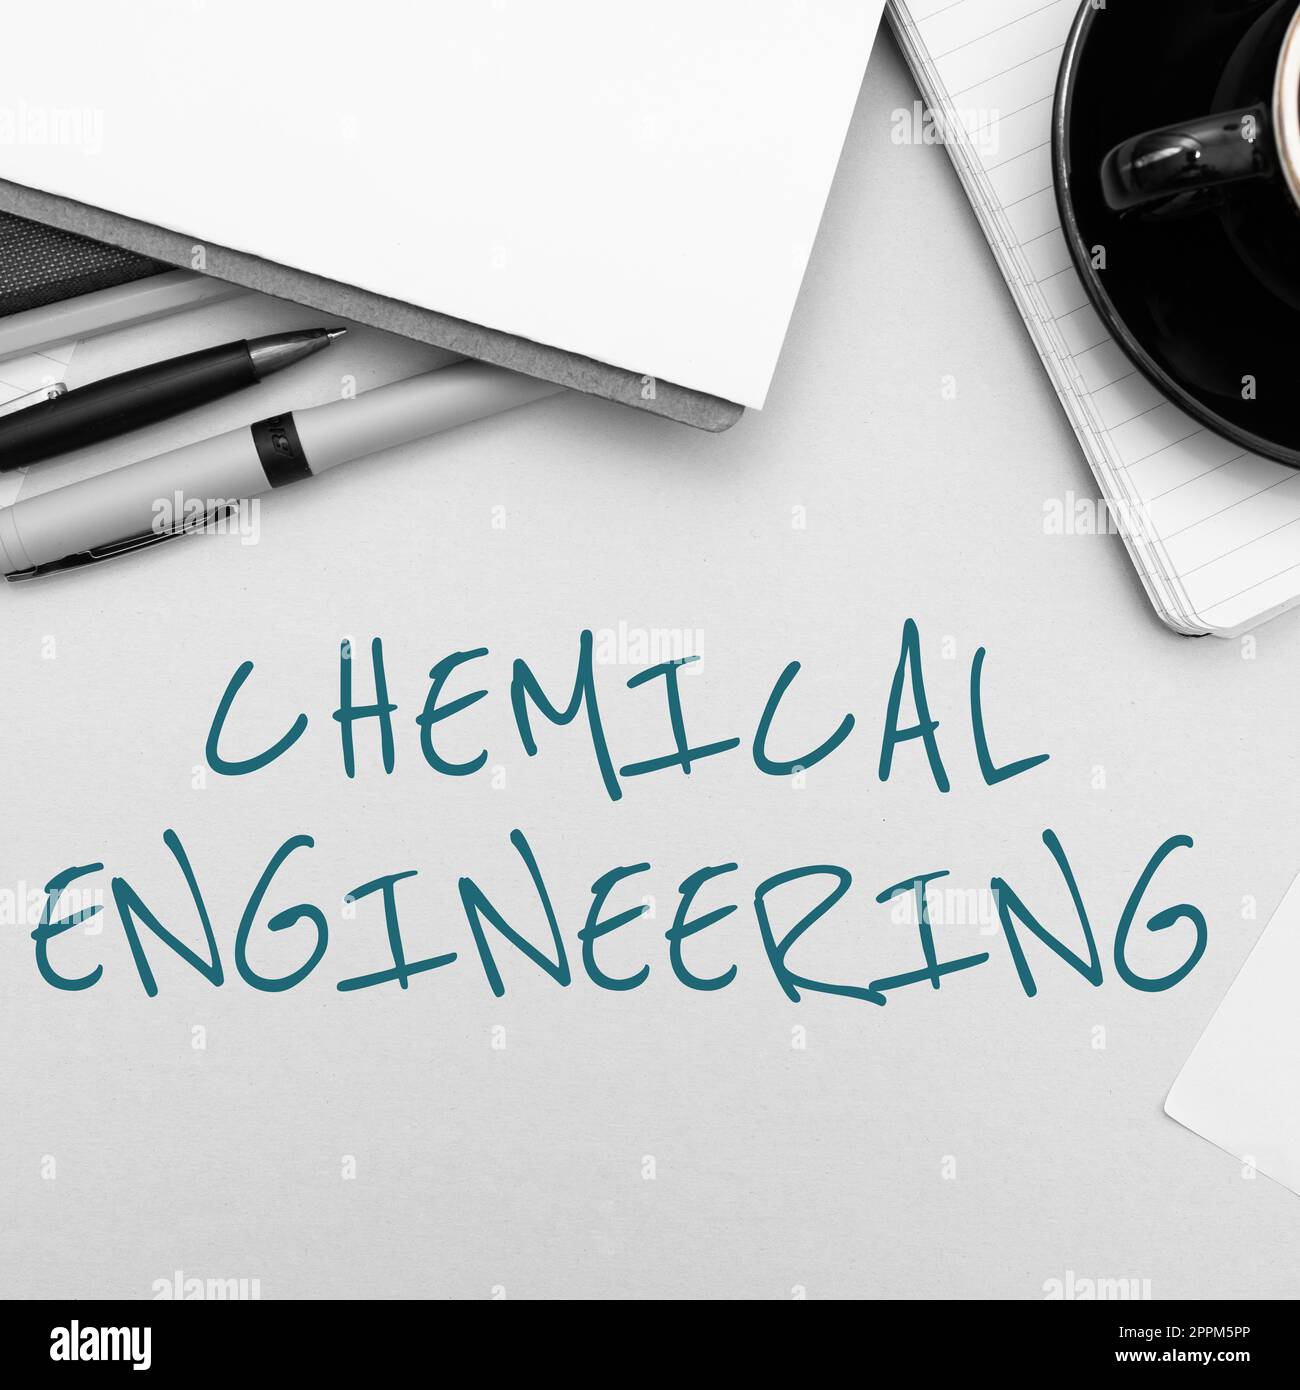 Handwriting text Chemical Engineering. Internet Concept developing things dealing with the industrial application of chemistry Stock Photo